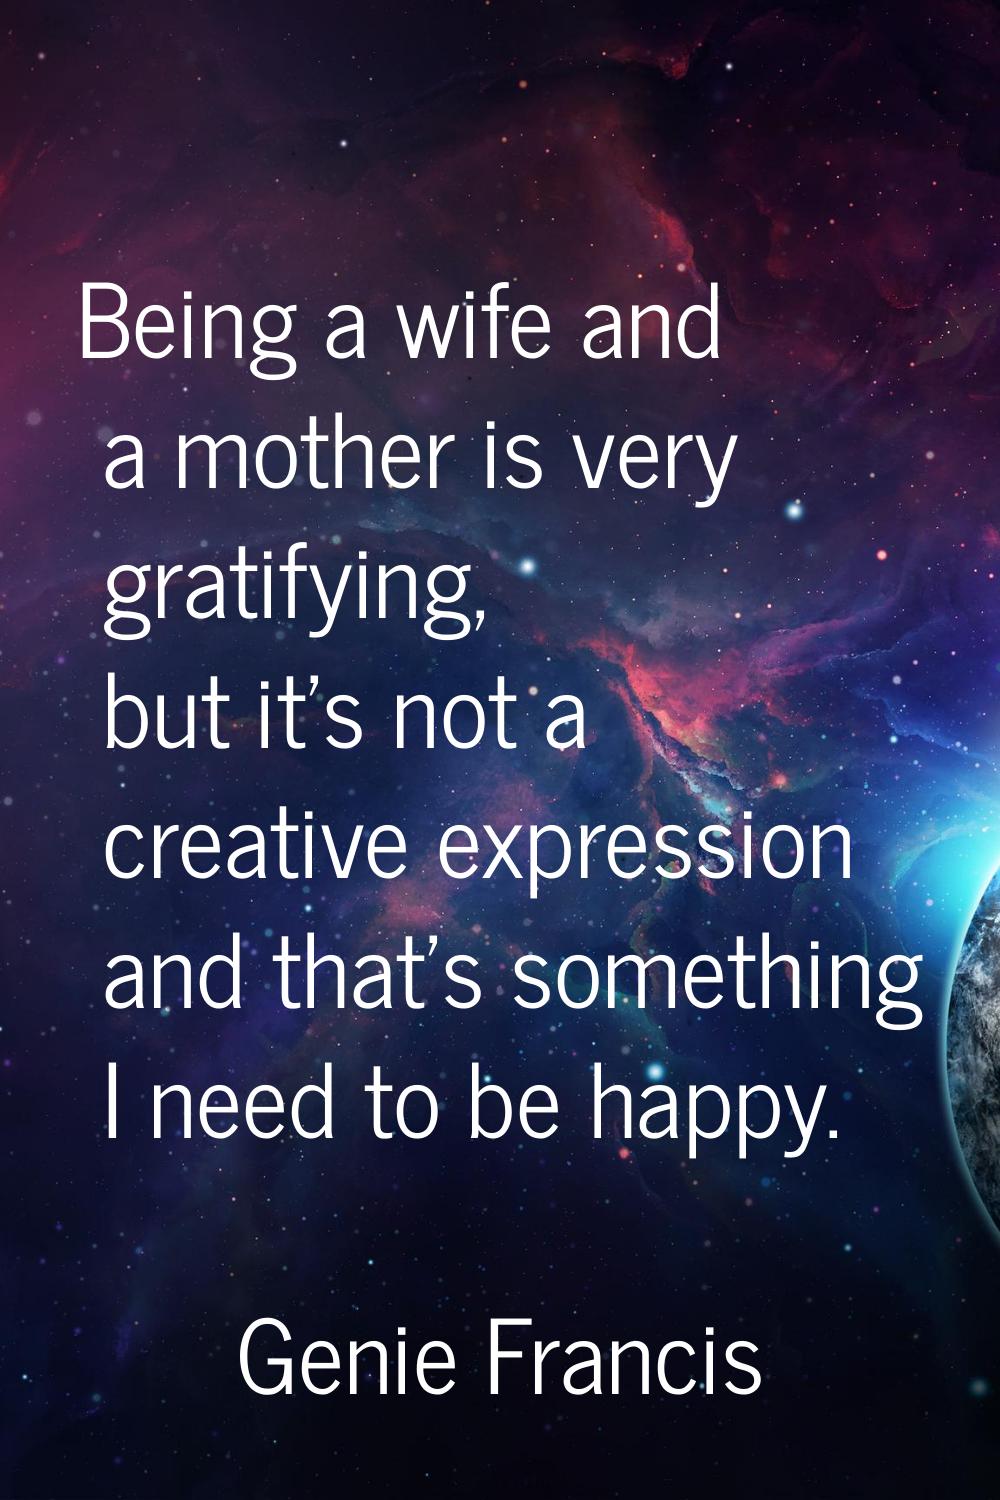 Being a wife and a mother is very gratifying, but it's not a creative expression and that's somethi